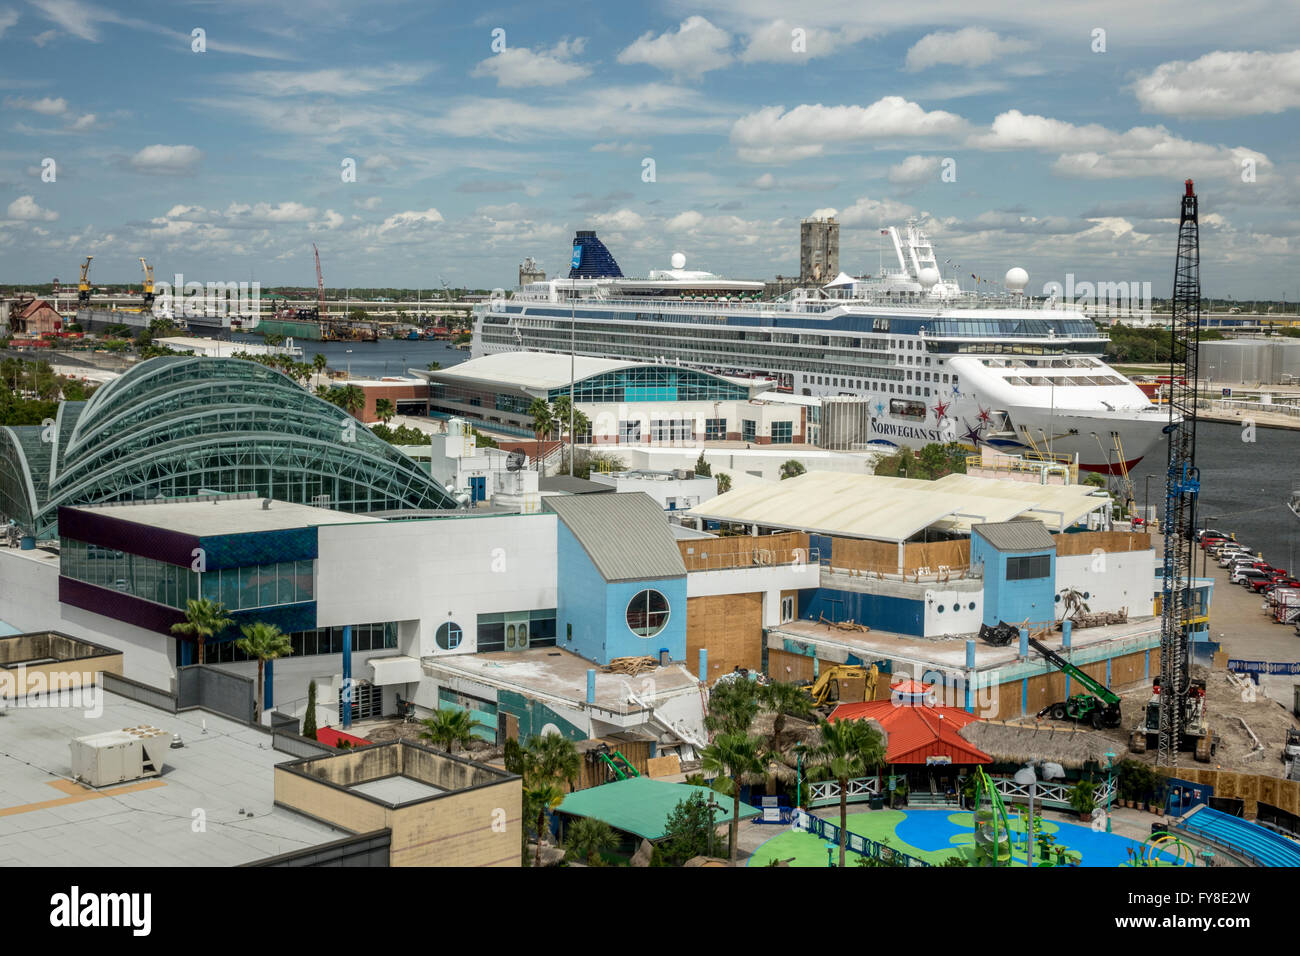 The Cruise Ship Port Terminal In Tampa Bay With The Norwegian Star And American Victory Ships In Port Stock Photo